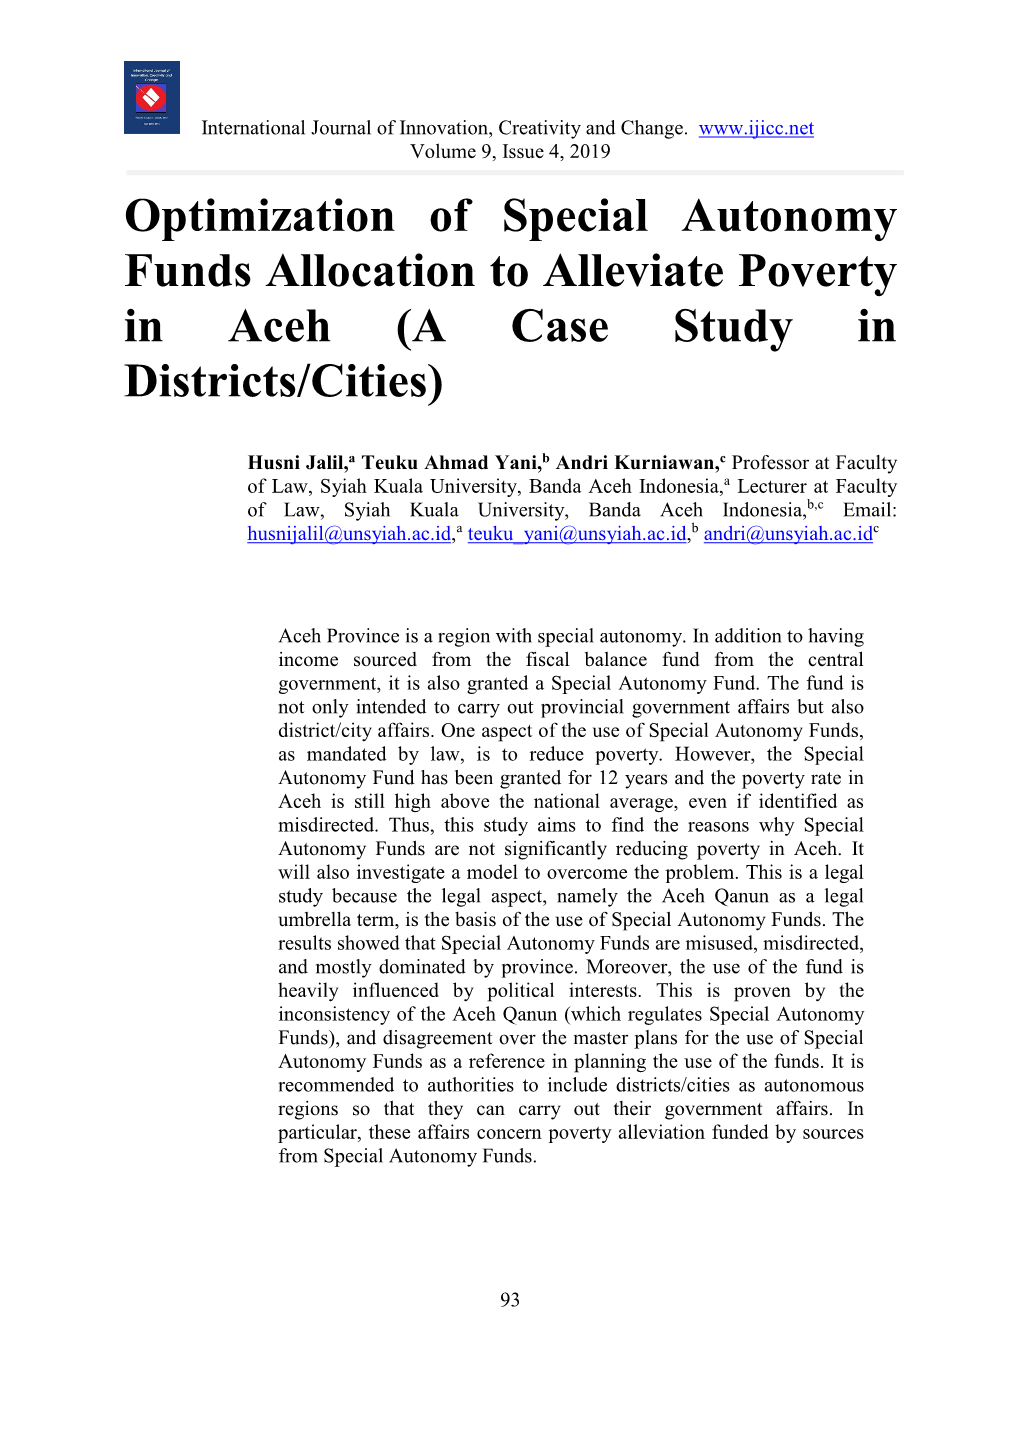 Optimization of Special Autonomy Funds Allocation to Alleviate Poverty in Aceh (A Case Study in Districts/Cities)